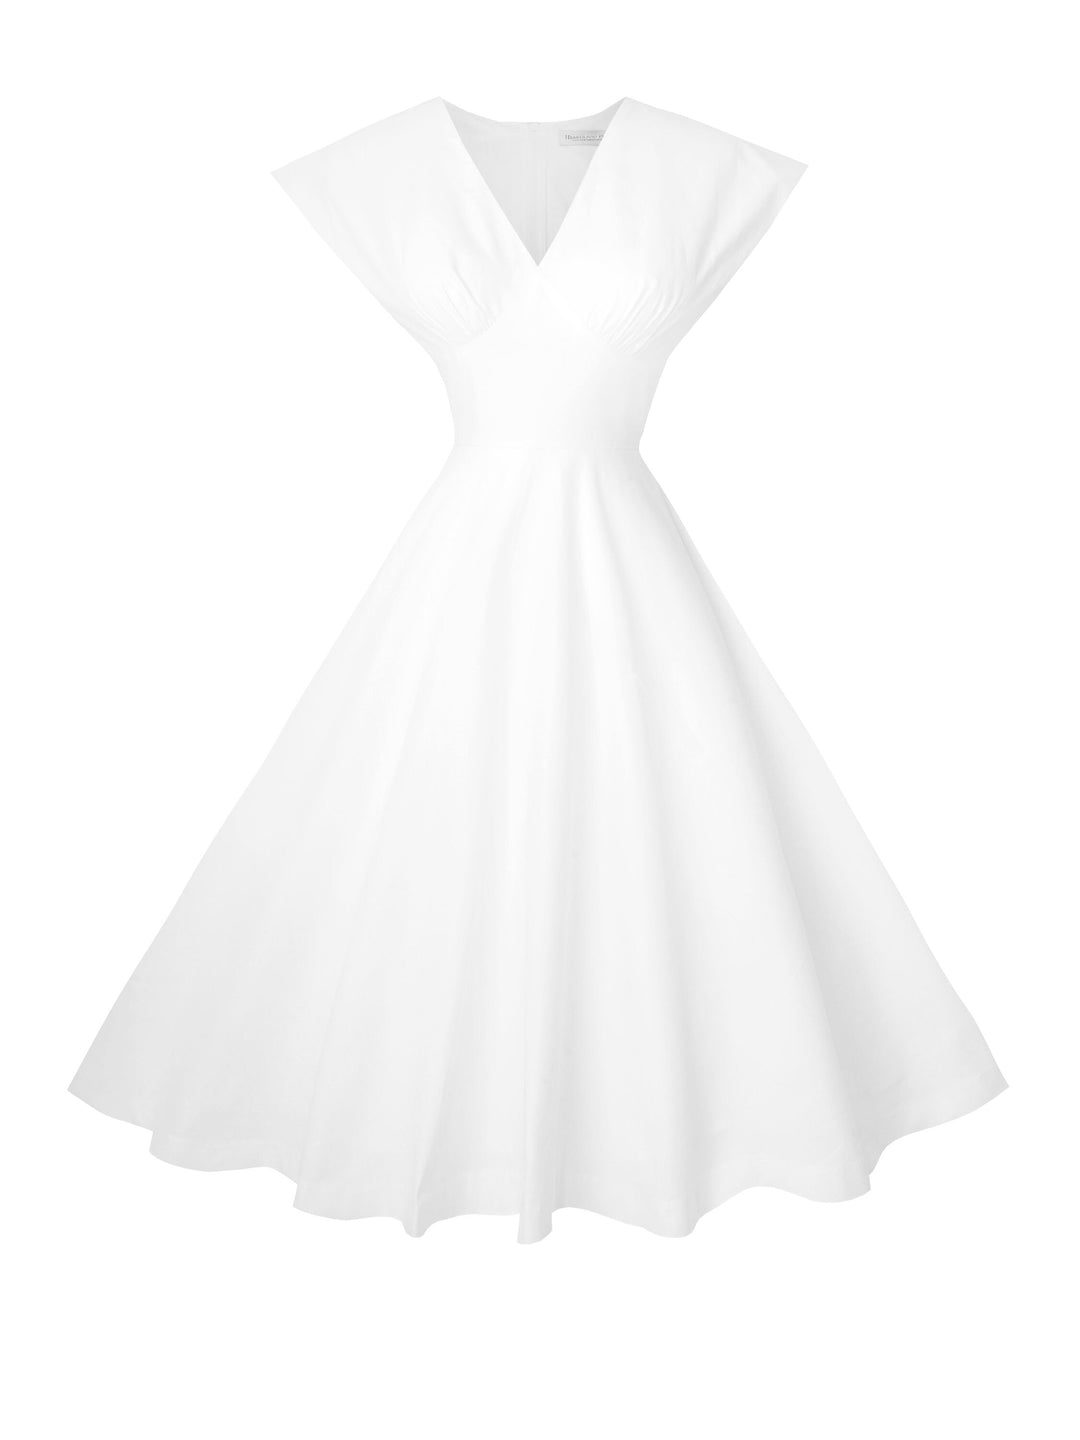 RTS - Size S - Kennedy Dress in White Cotton